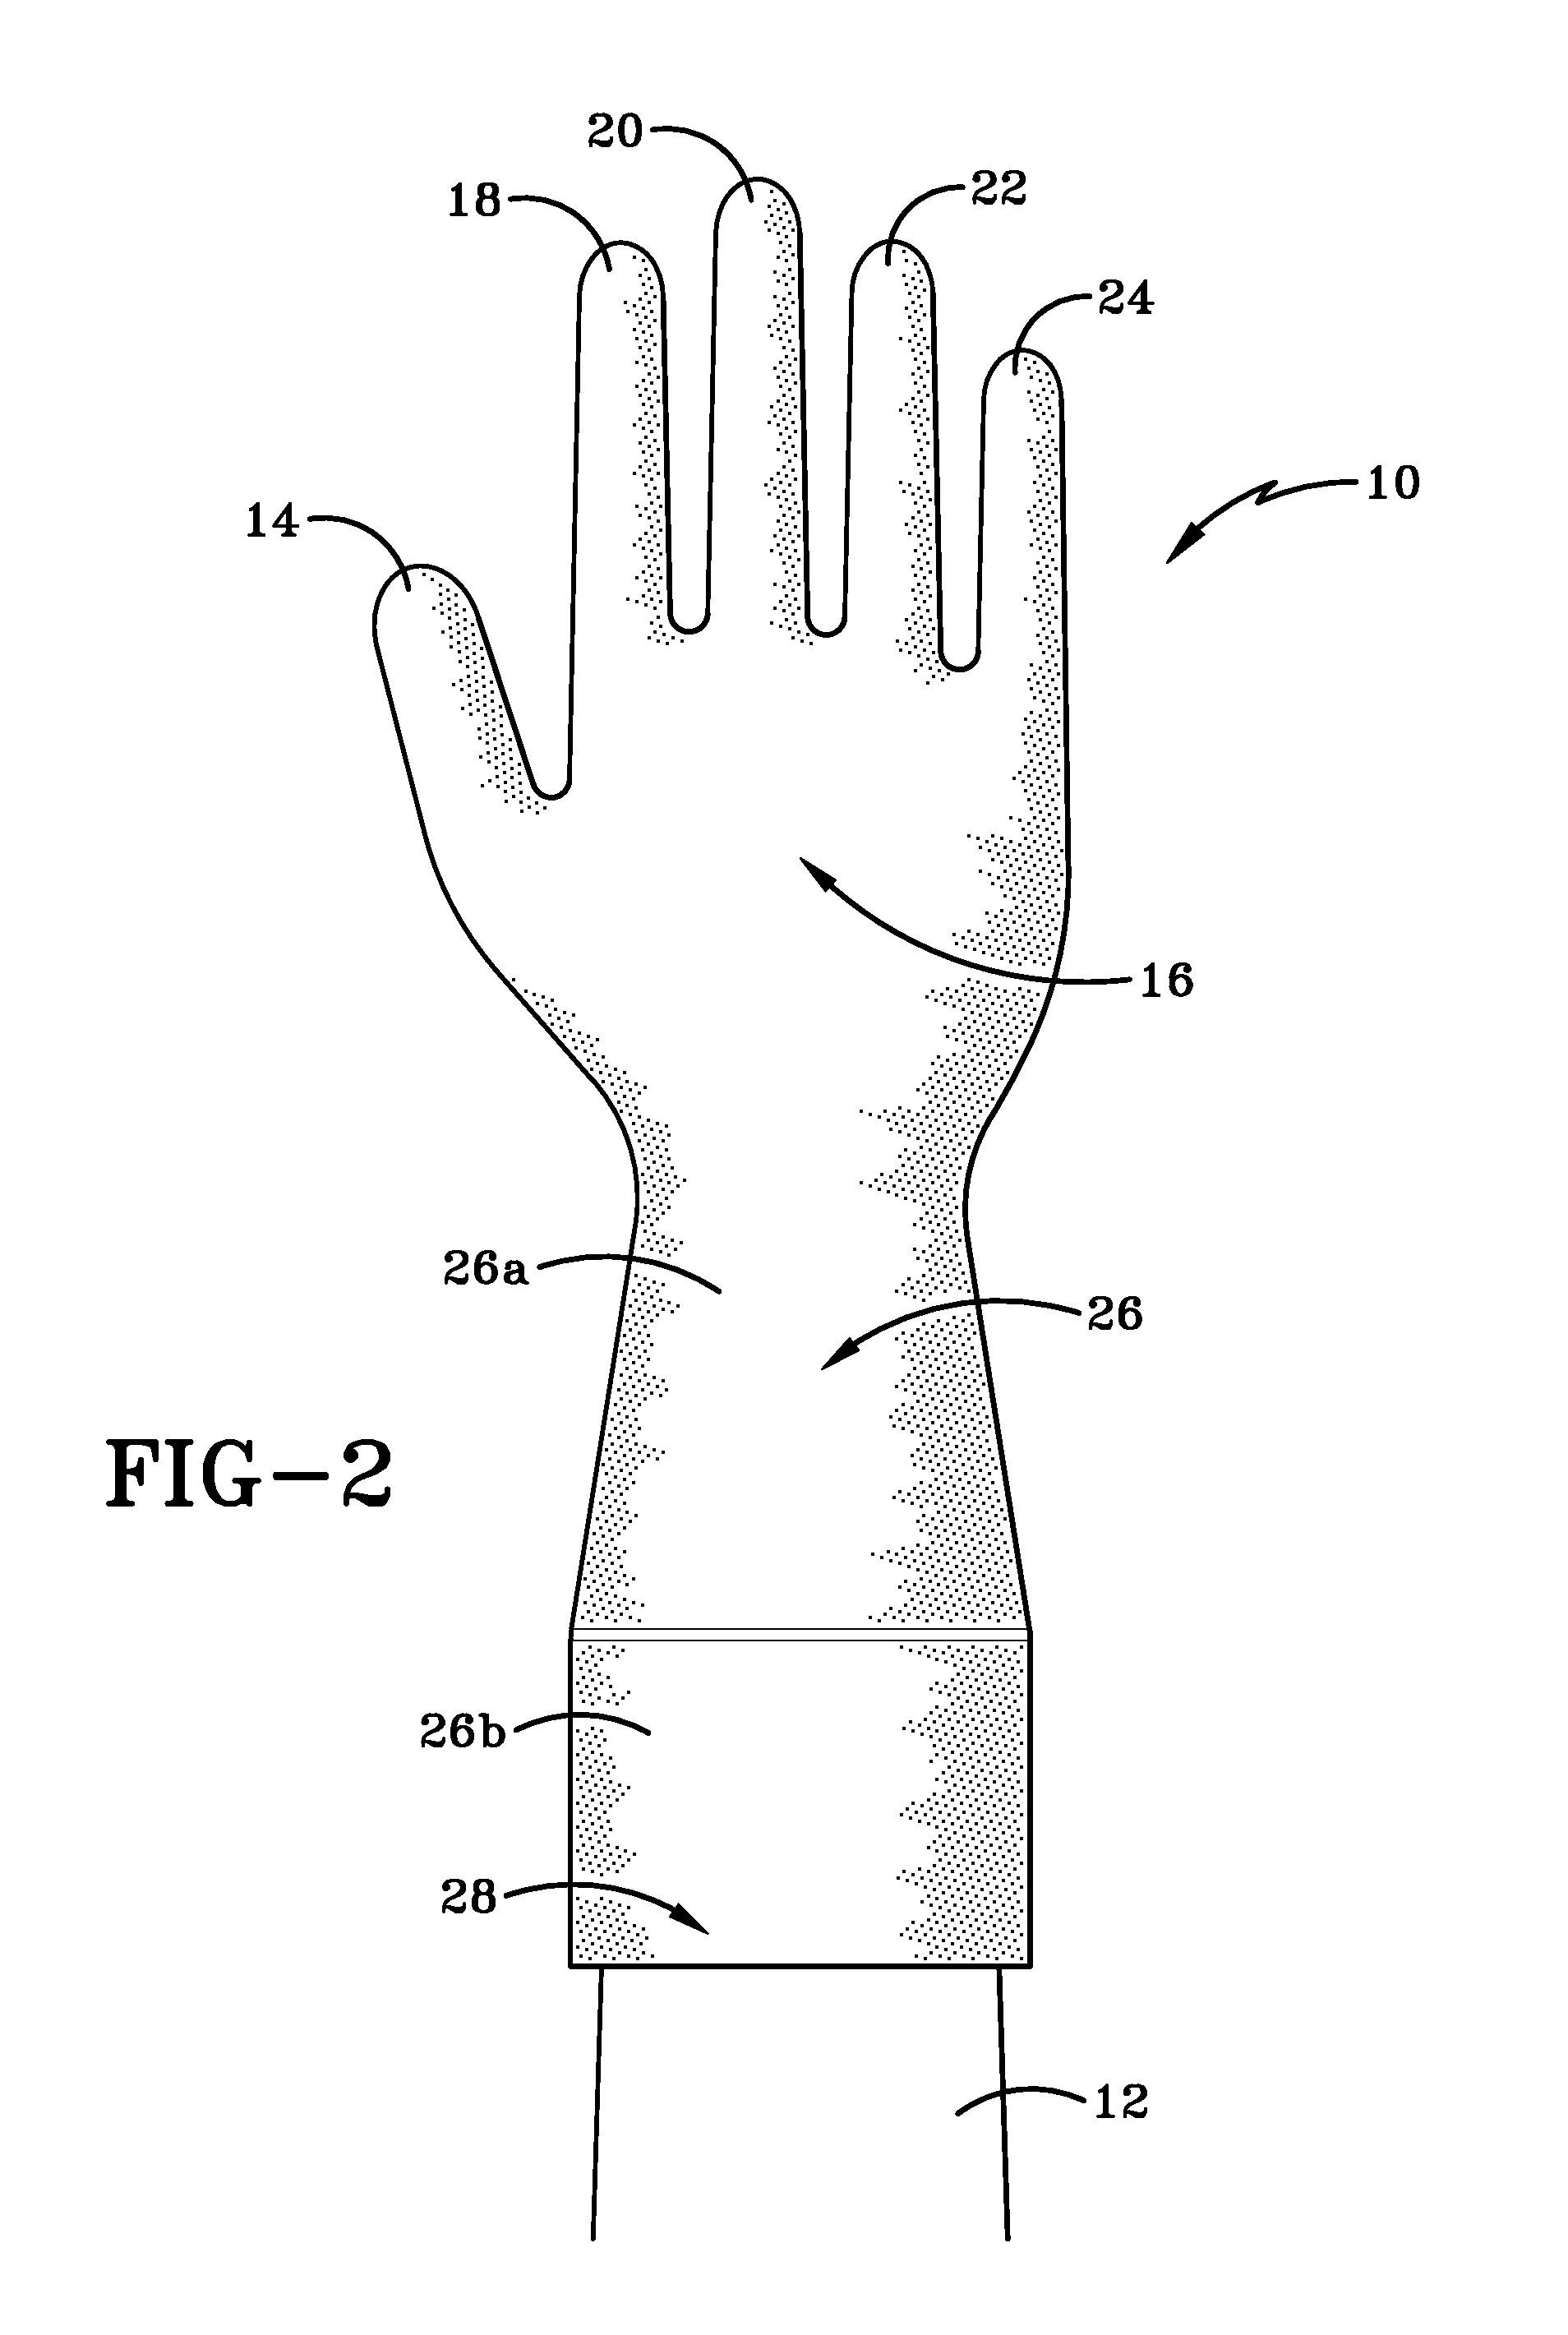 Method of fabricating a glove with a widened cuff area